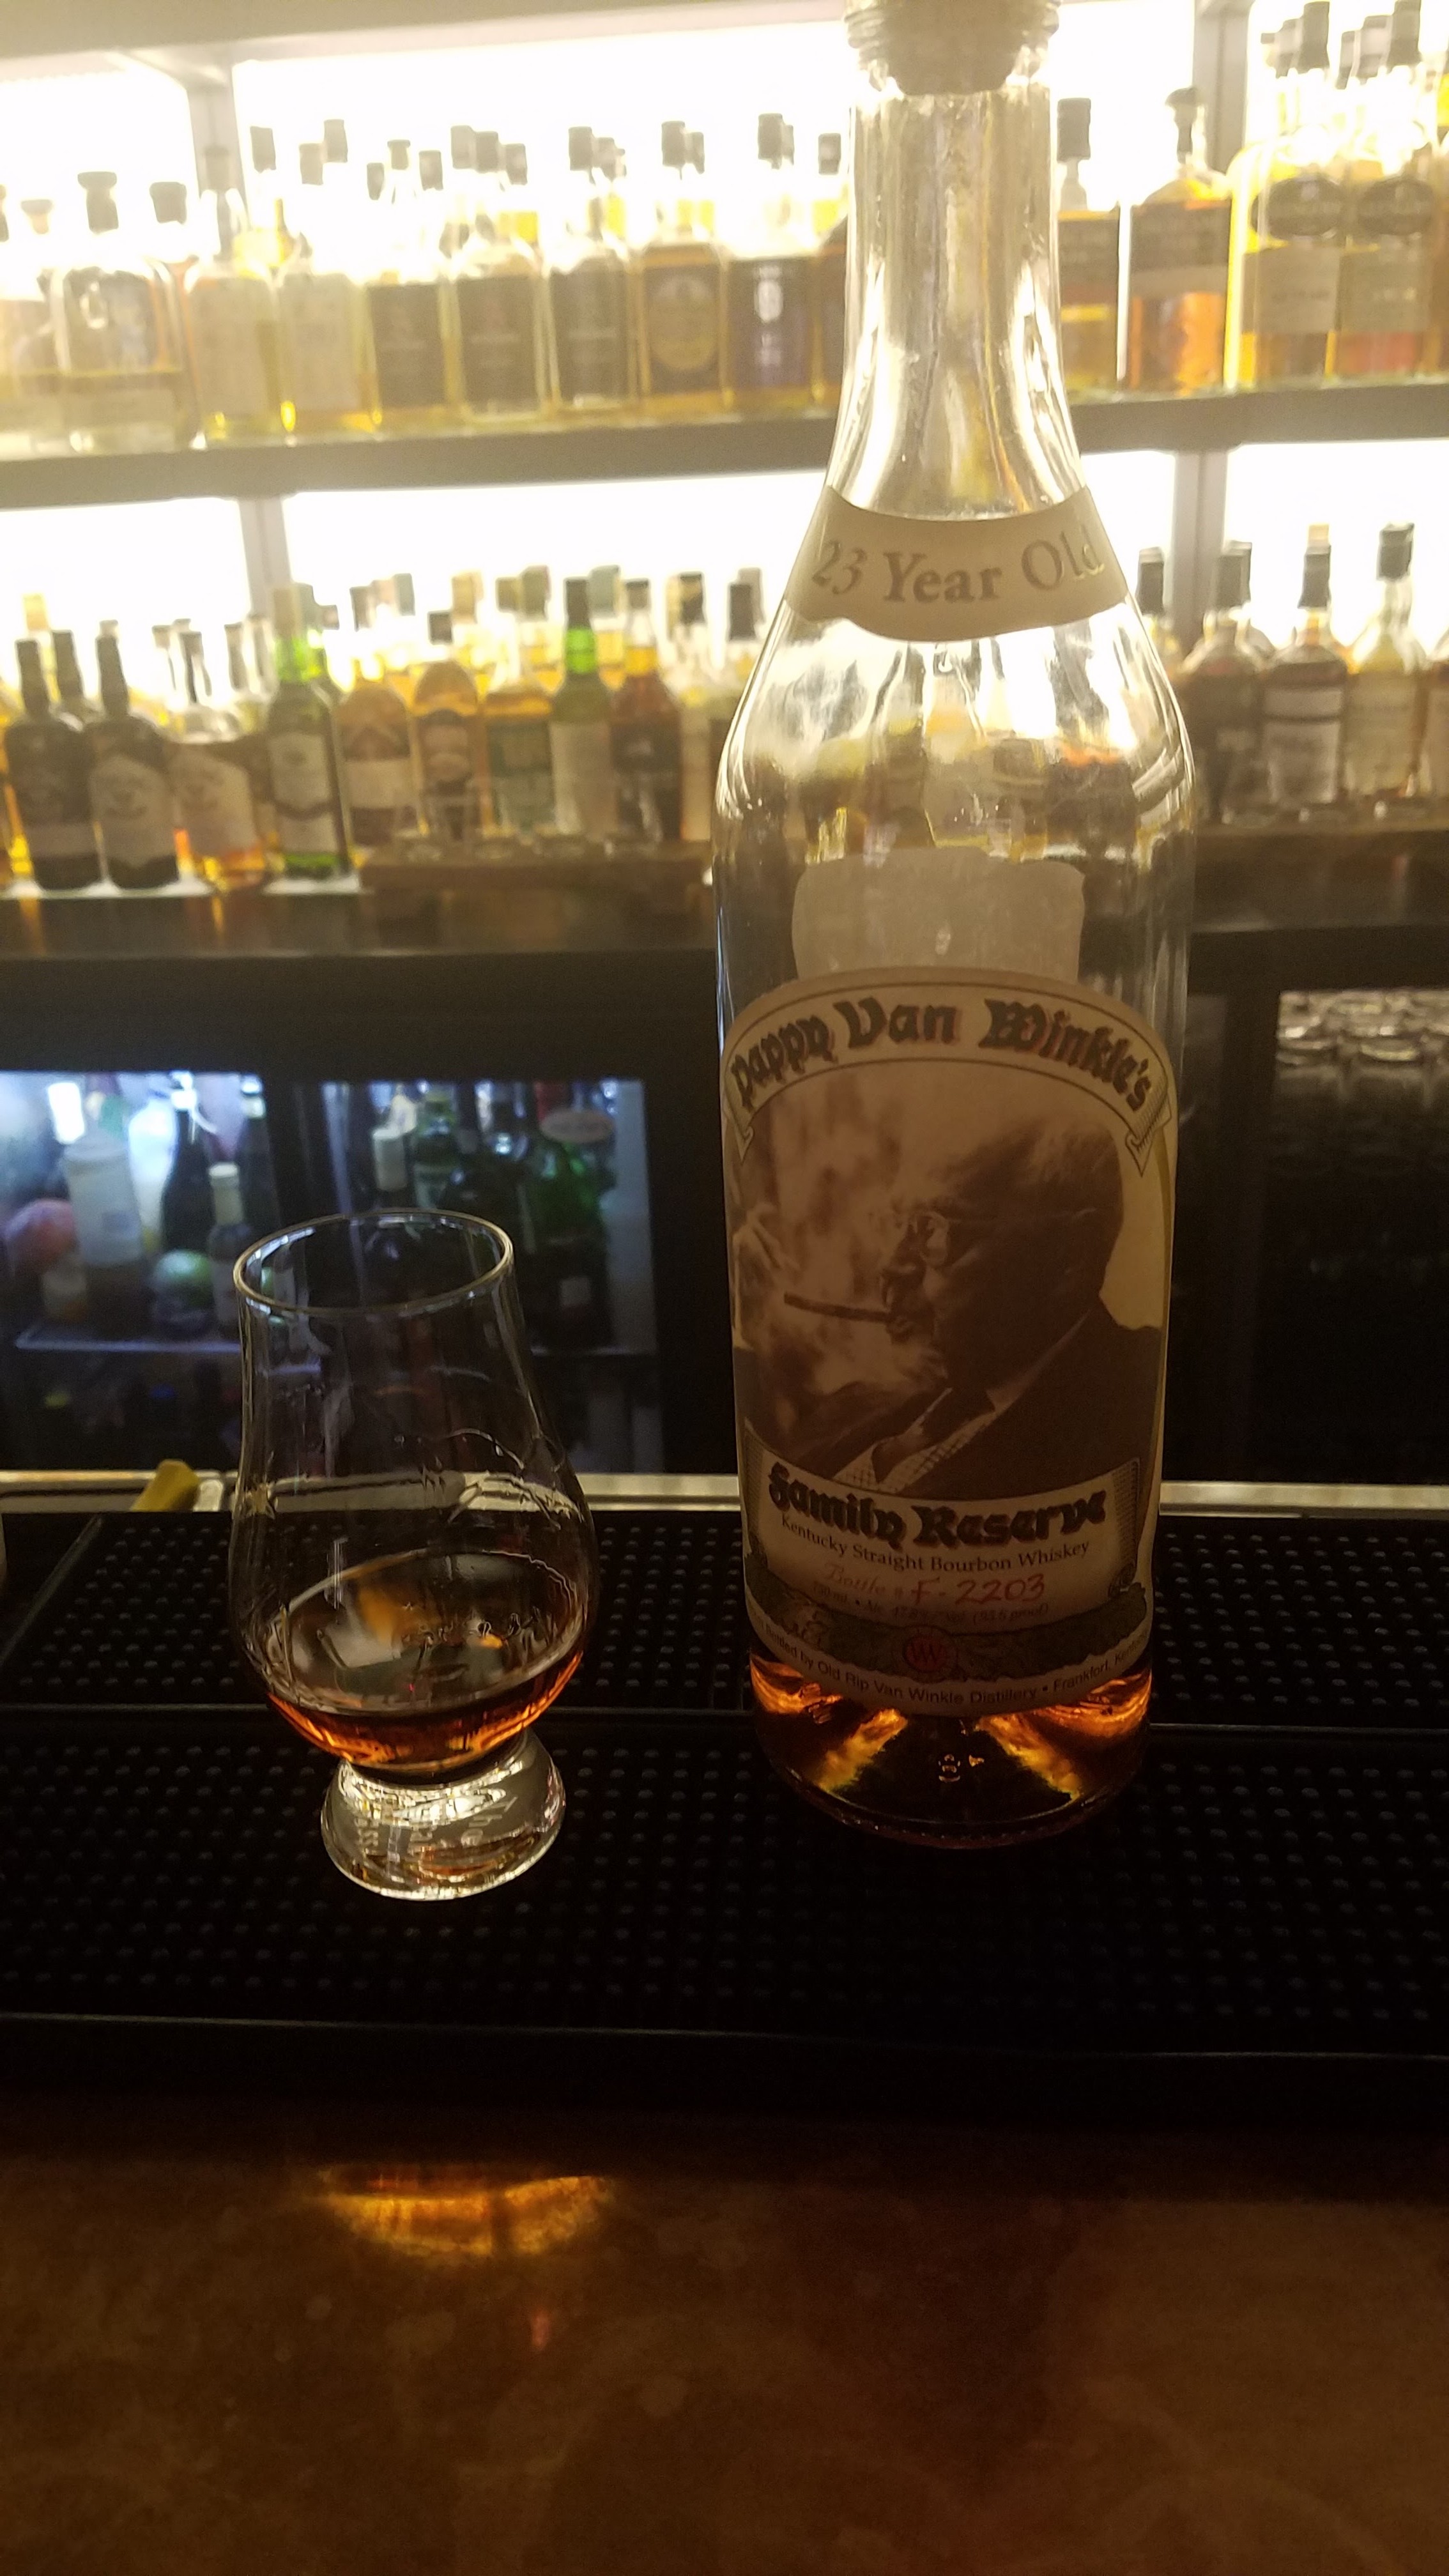 Got to try Pappy